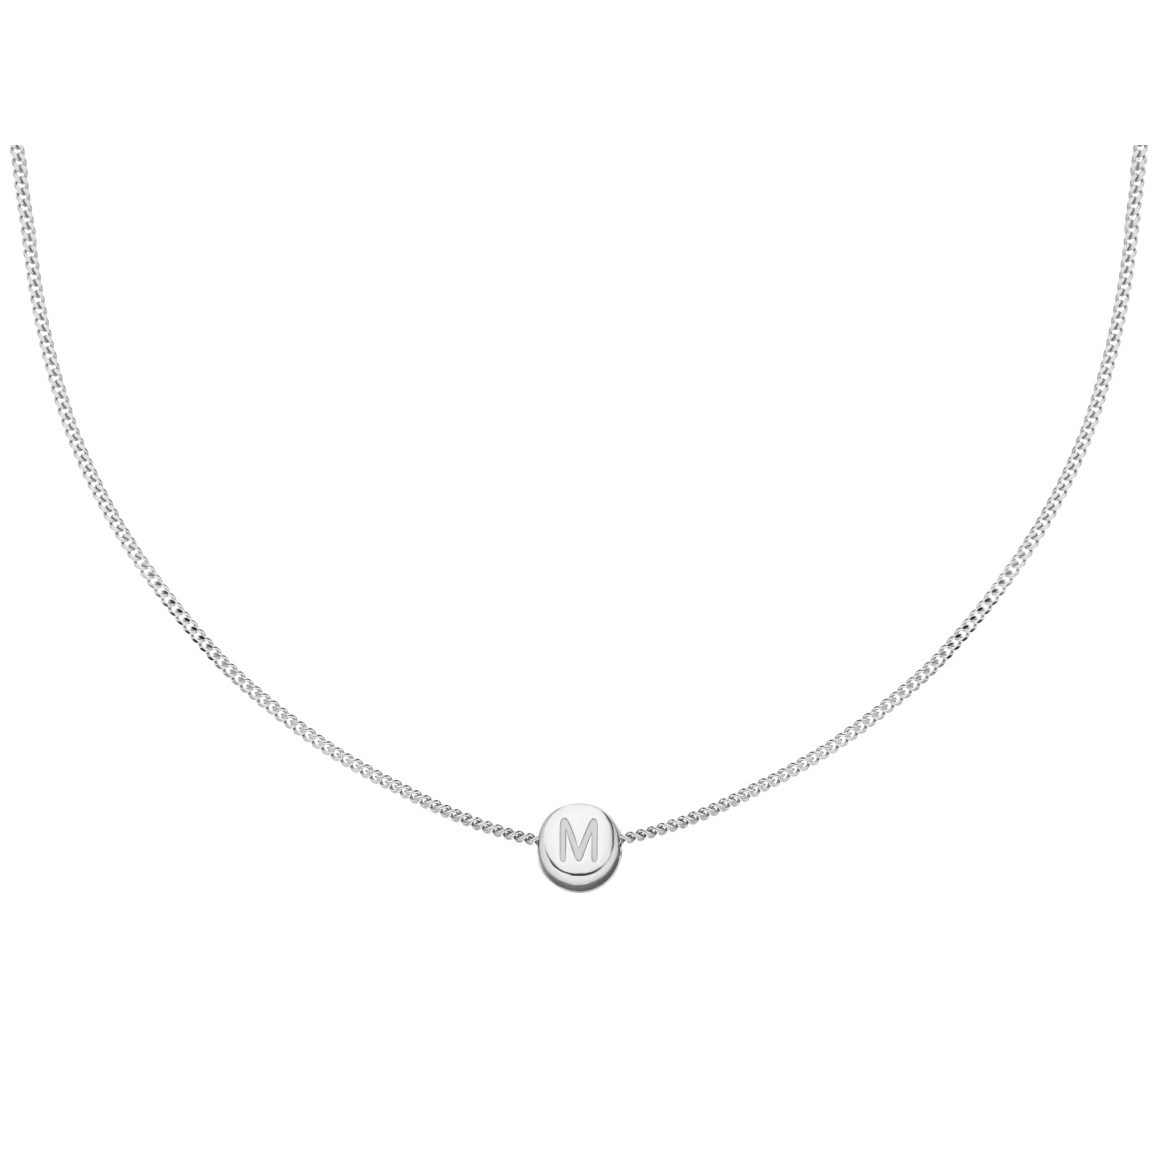 one letter curb chain necklace sterling silver